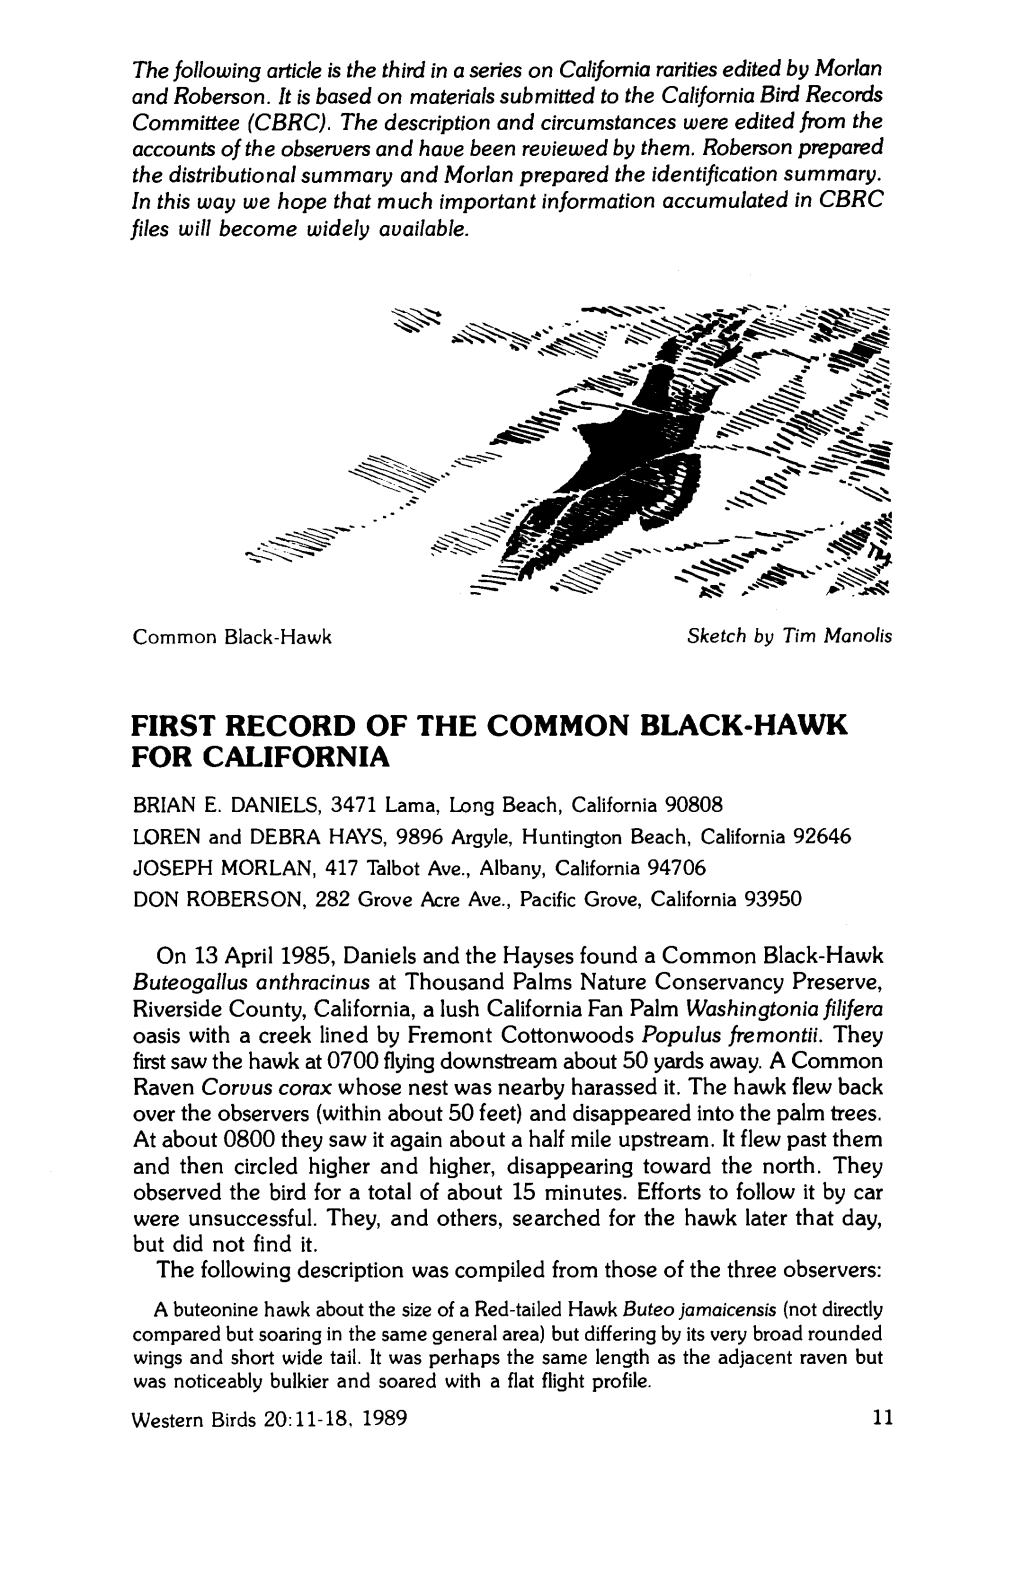 First Record of the Common Black-Hawk for California